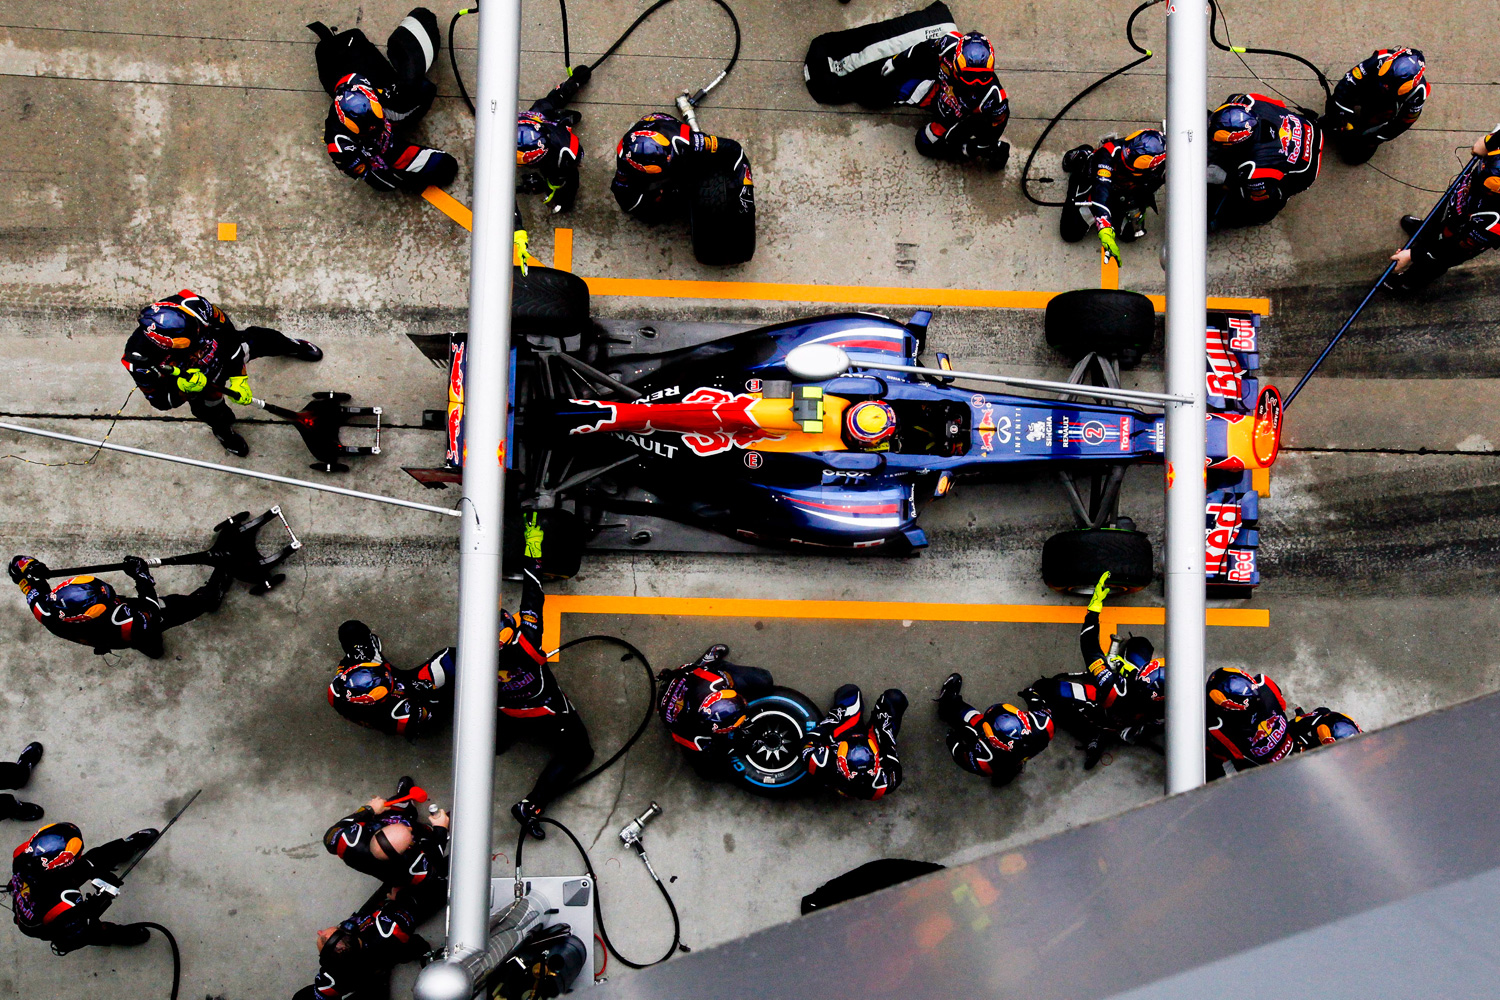 March 25, 2012. Australian Formula One racer Mark Webber, of Red Bull Racing, arrives at a pitstop during the 2012 Formula One Grand Prix of Malaysia at the Sepang International circuit, outside Kuala Lumpur.